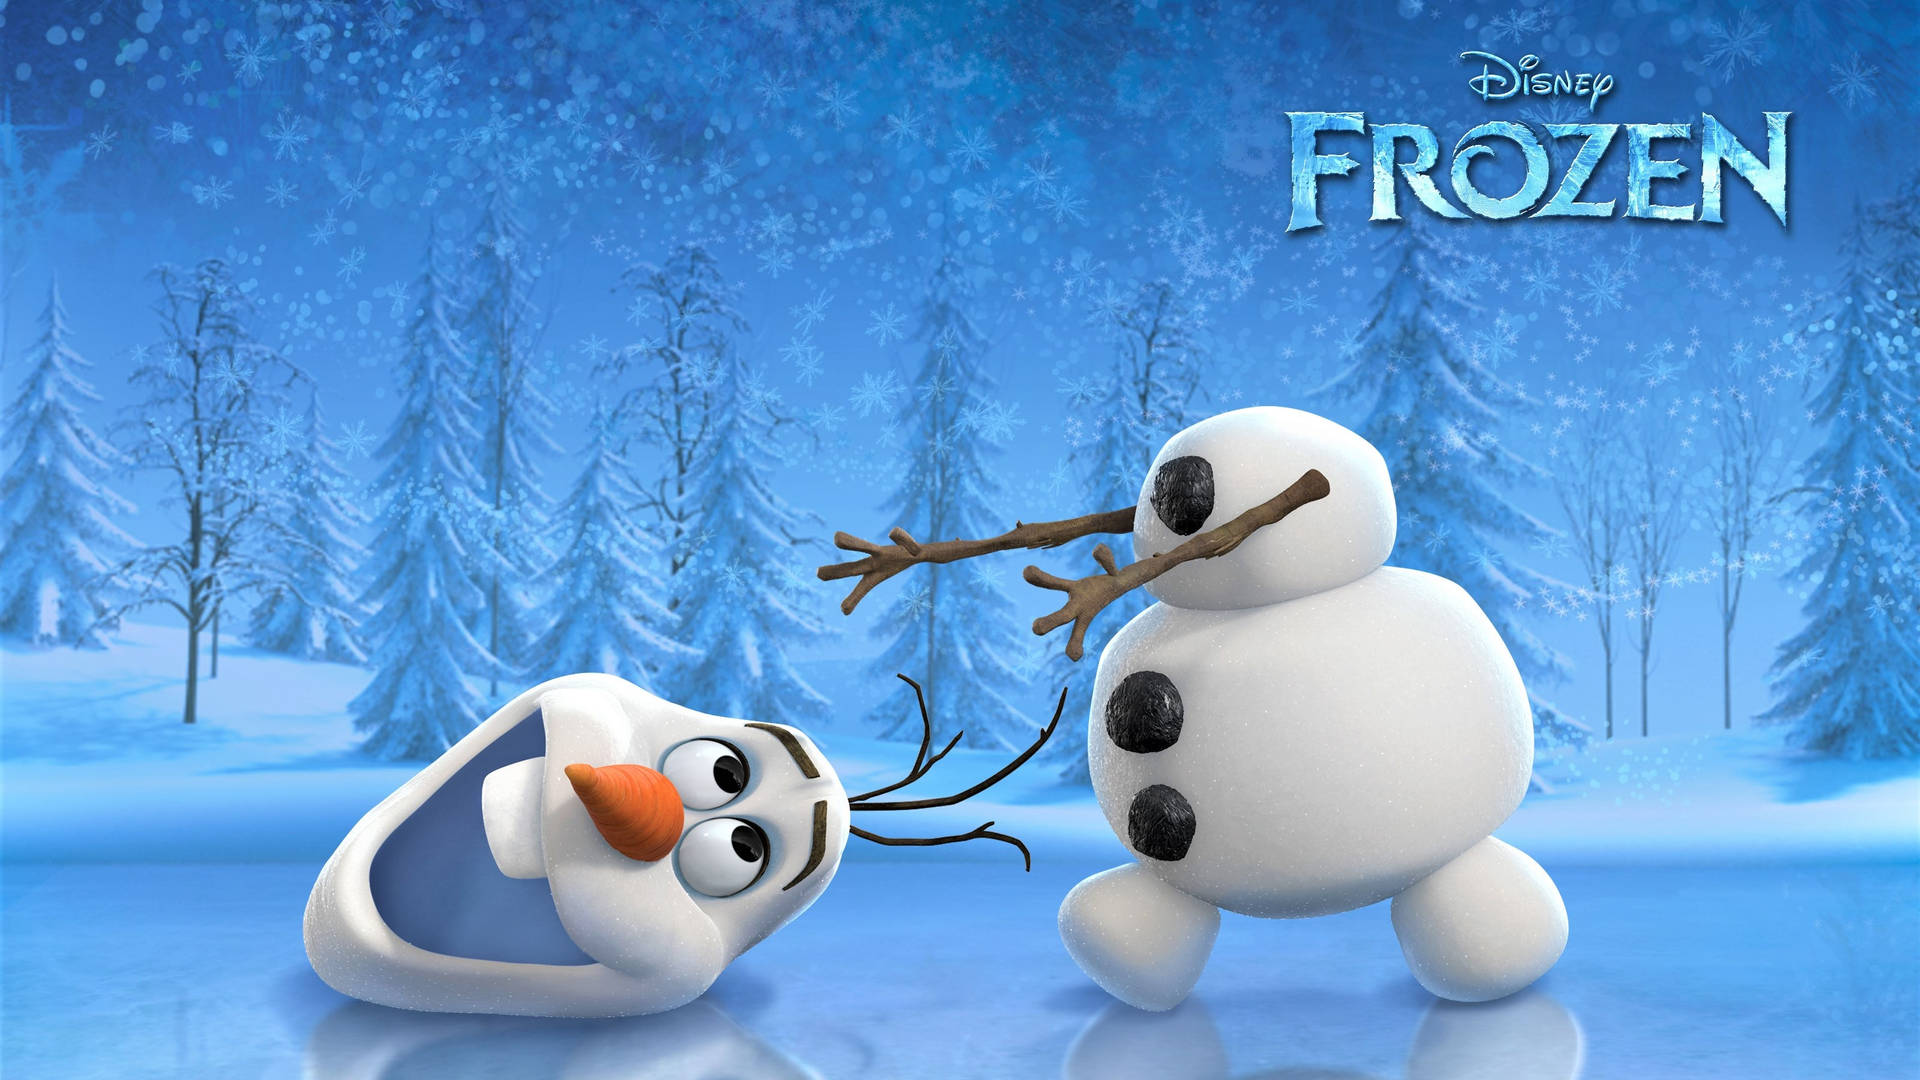 Olaf Frozen Poster Background